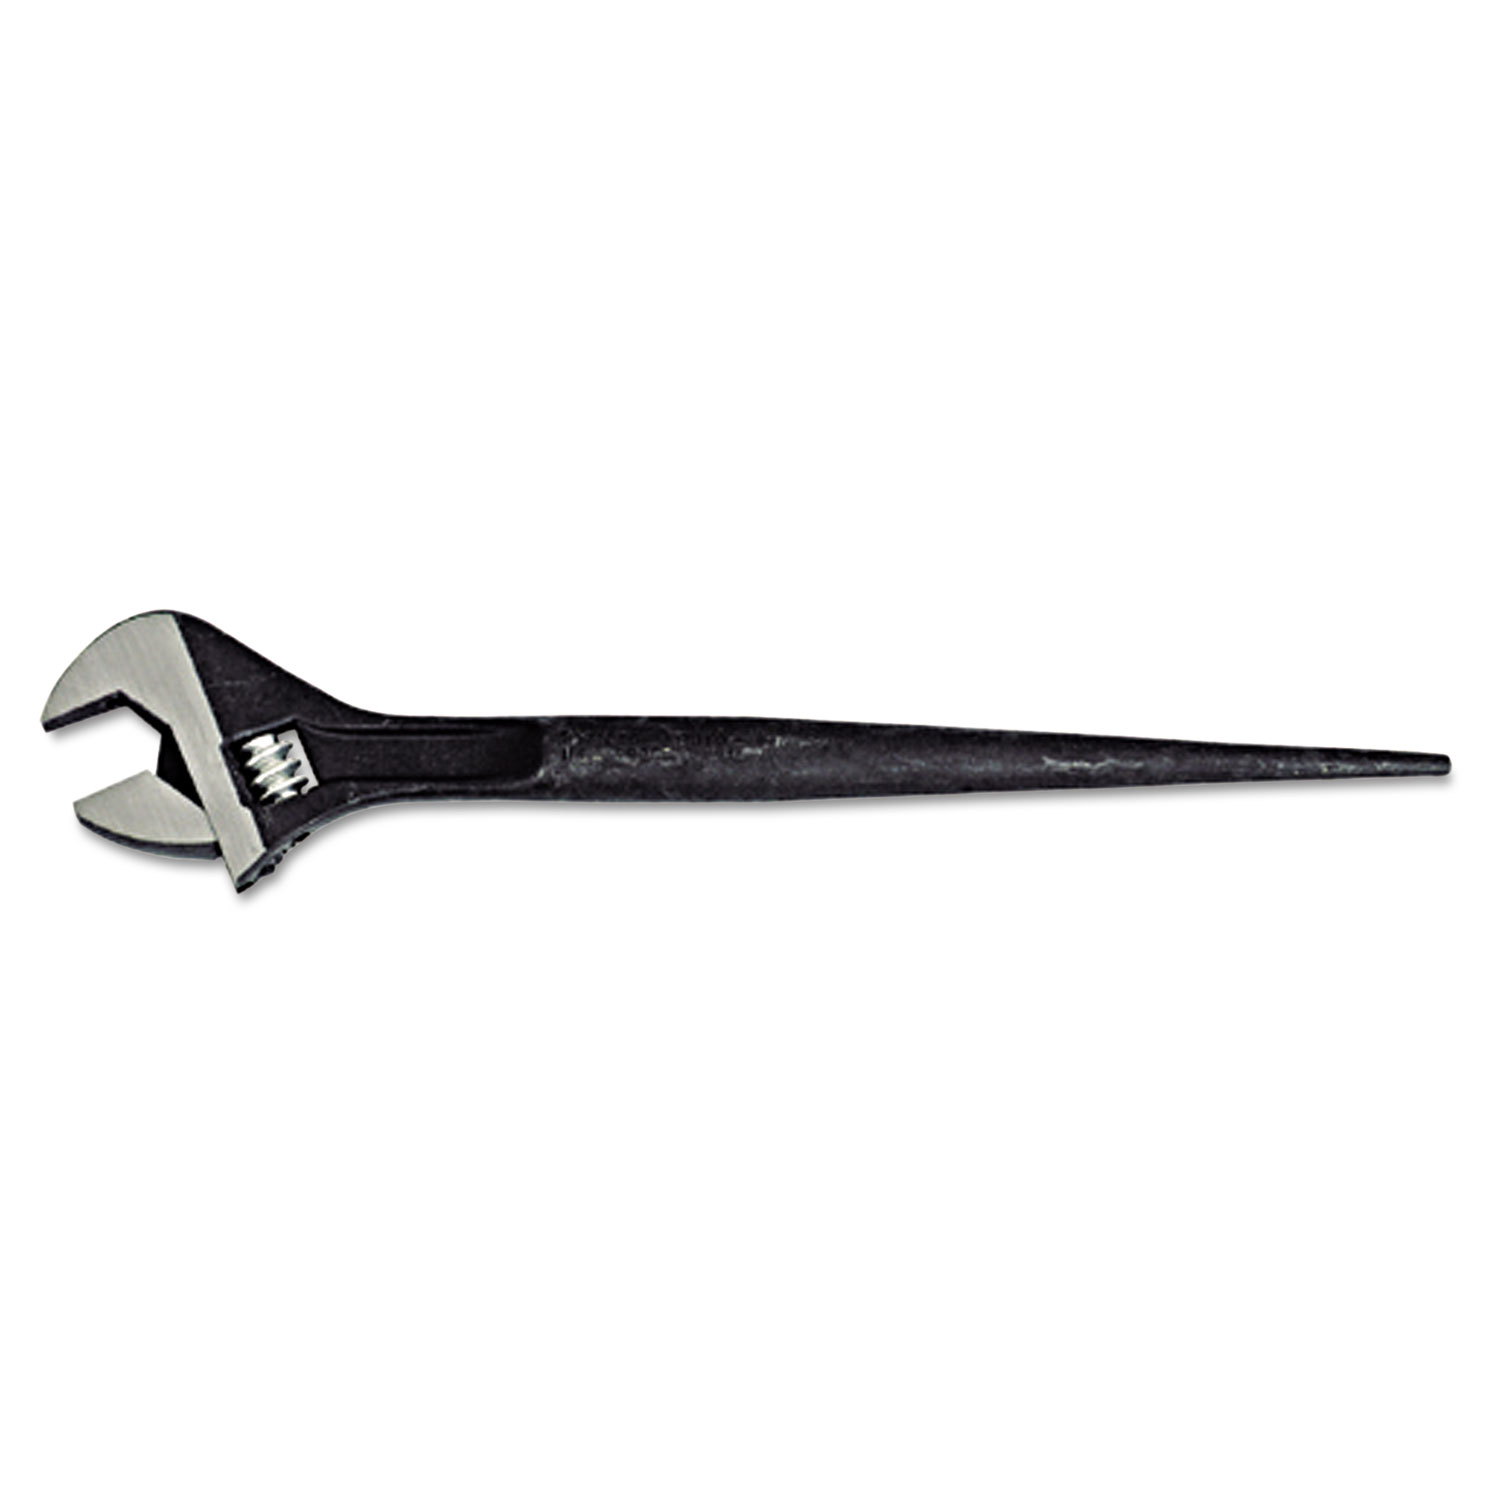 PROTO Adjustable Spud Wrench, 16 3/32 Long, 1 1/2 Opening, Black